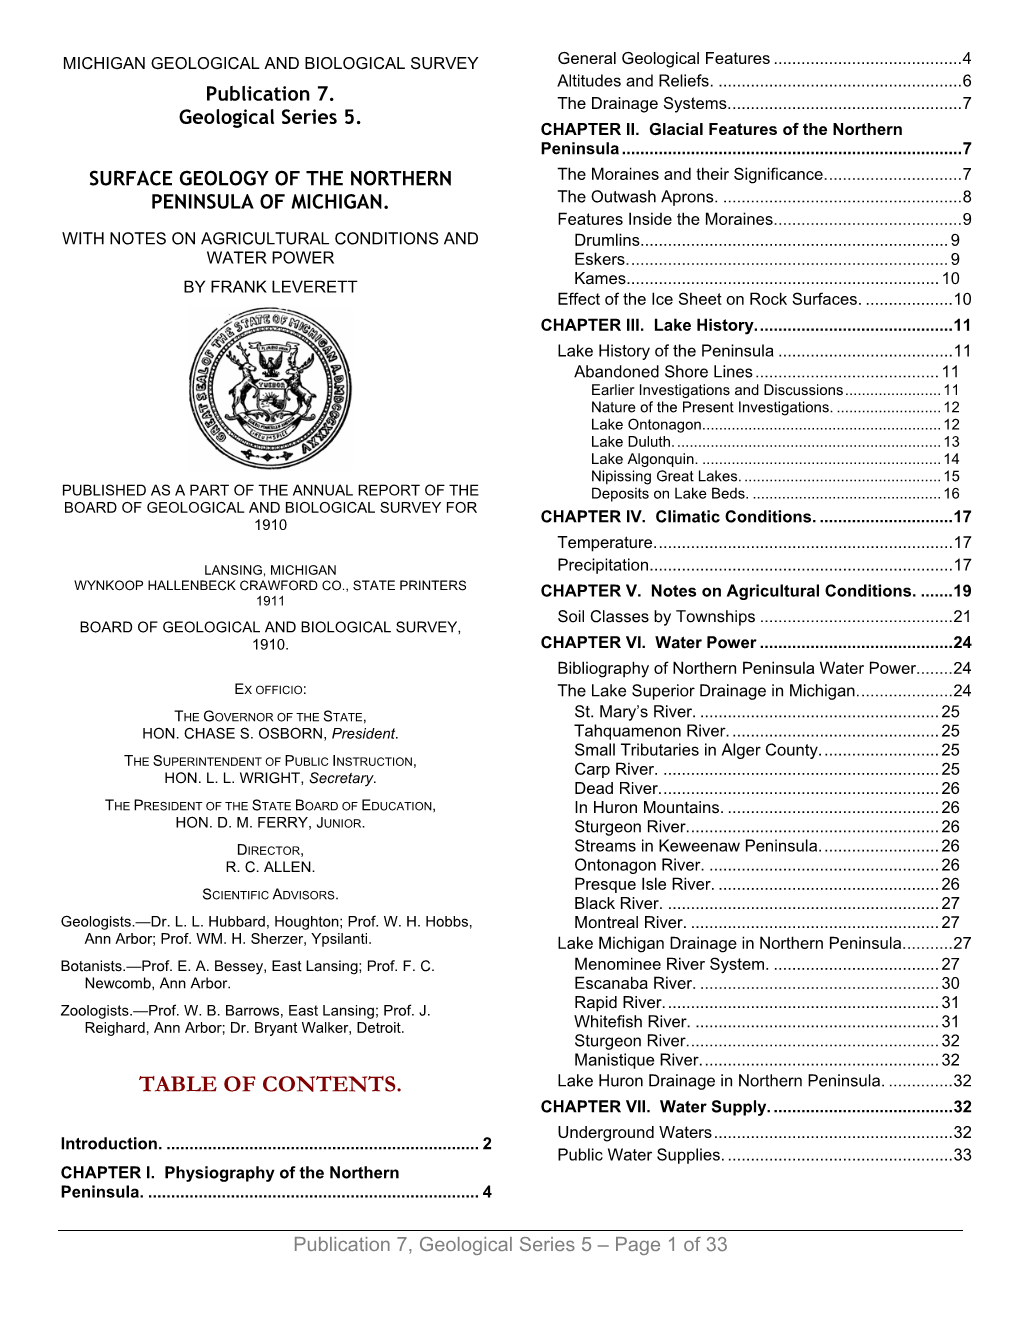 TABLE of CONTENTS. Lake Huron Drainage in Northern Peninsula